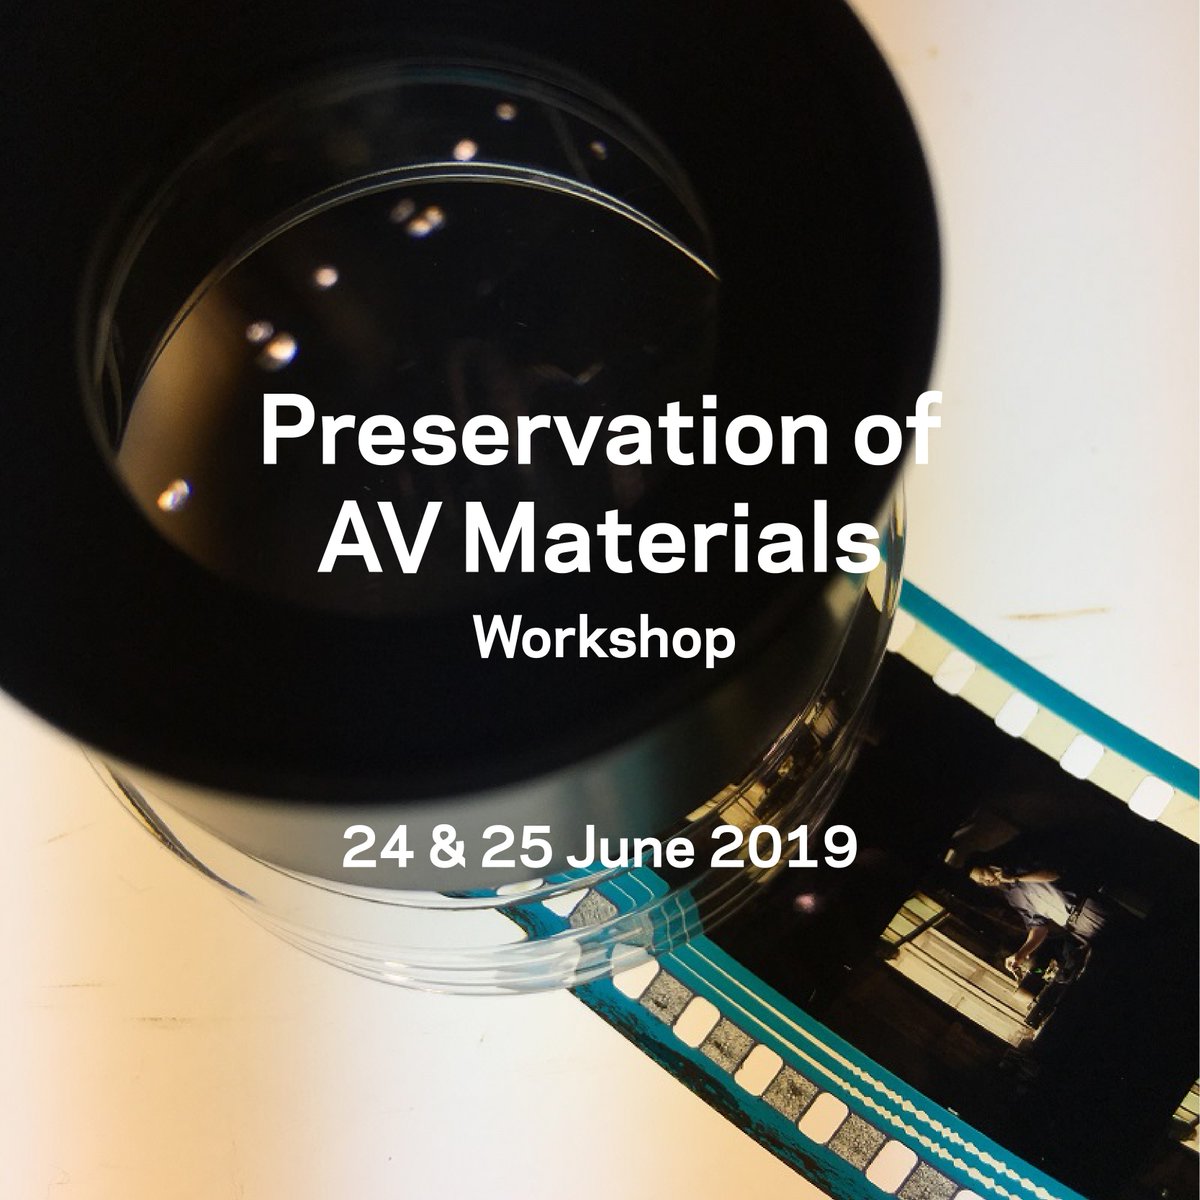 Learn more about #Audiovisual Preservation at our hands-on workshop! Register at bit.ly/afa-workshop (limited seats available!) Registration closes 20 December 2018. #AVHeritage #SARBICA